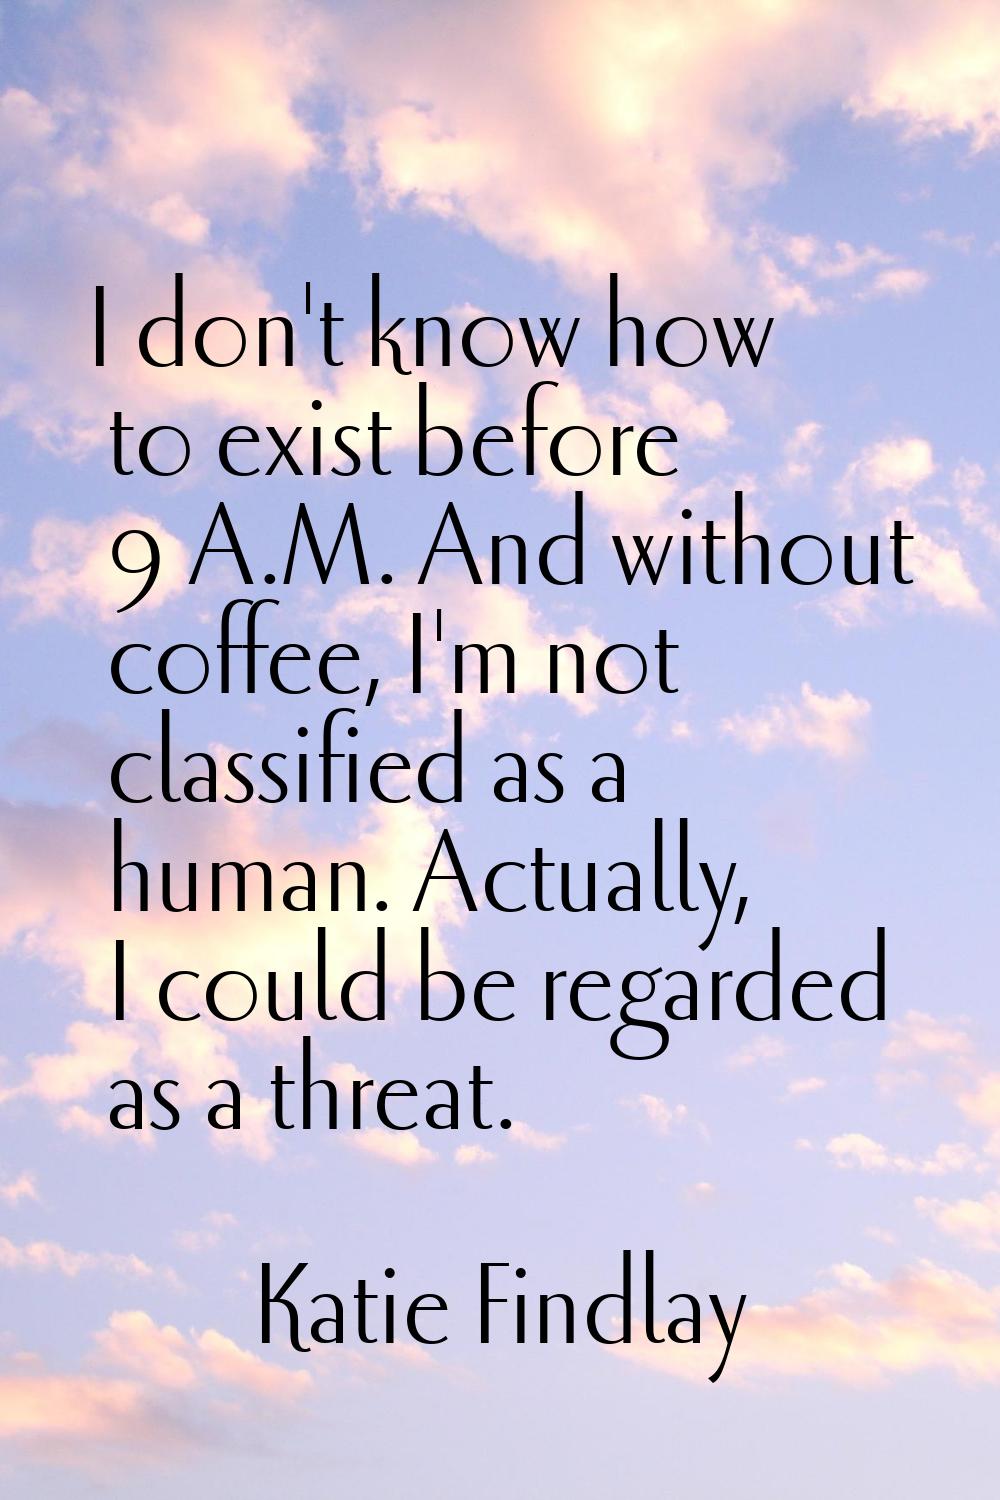 I don't know how to exist before 9 A.M. And without coffee, I'm not classified as a human. Actually